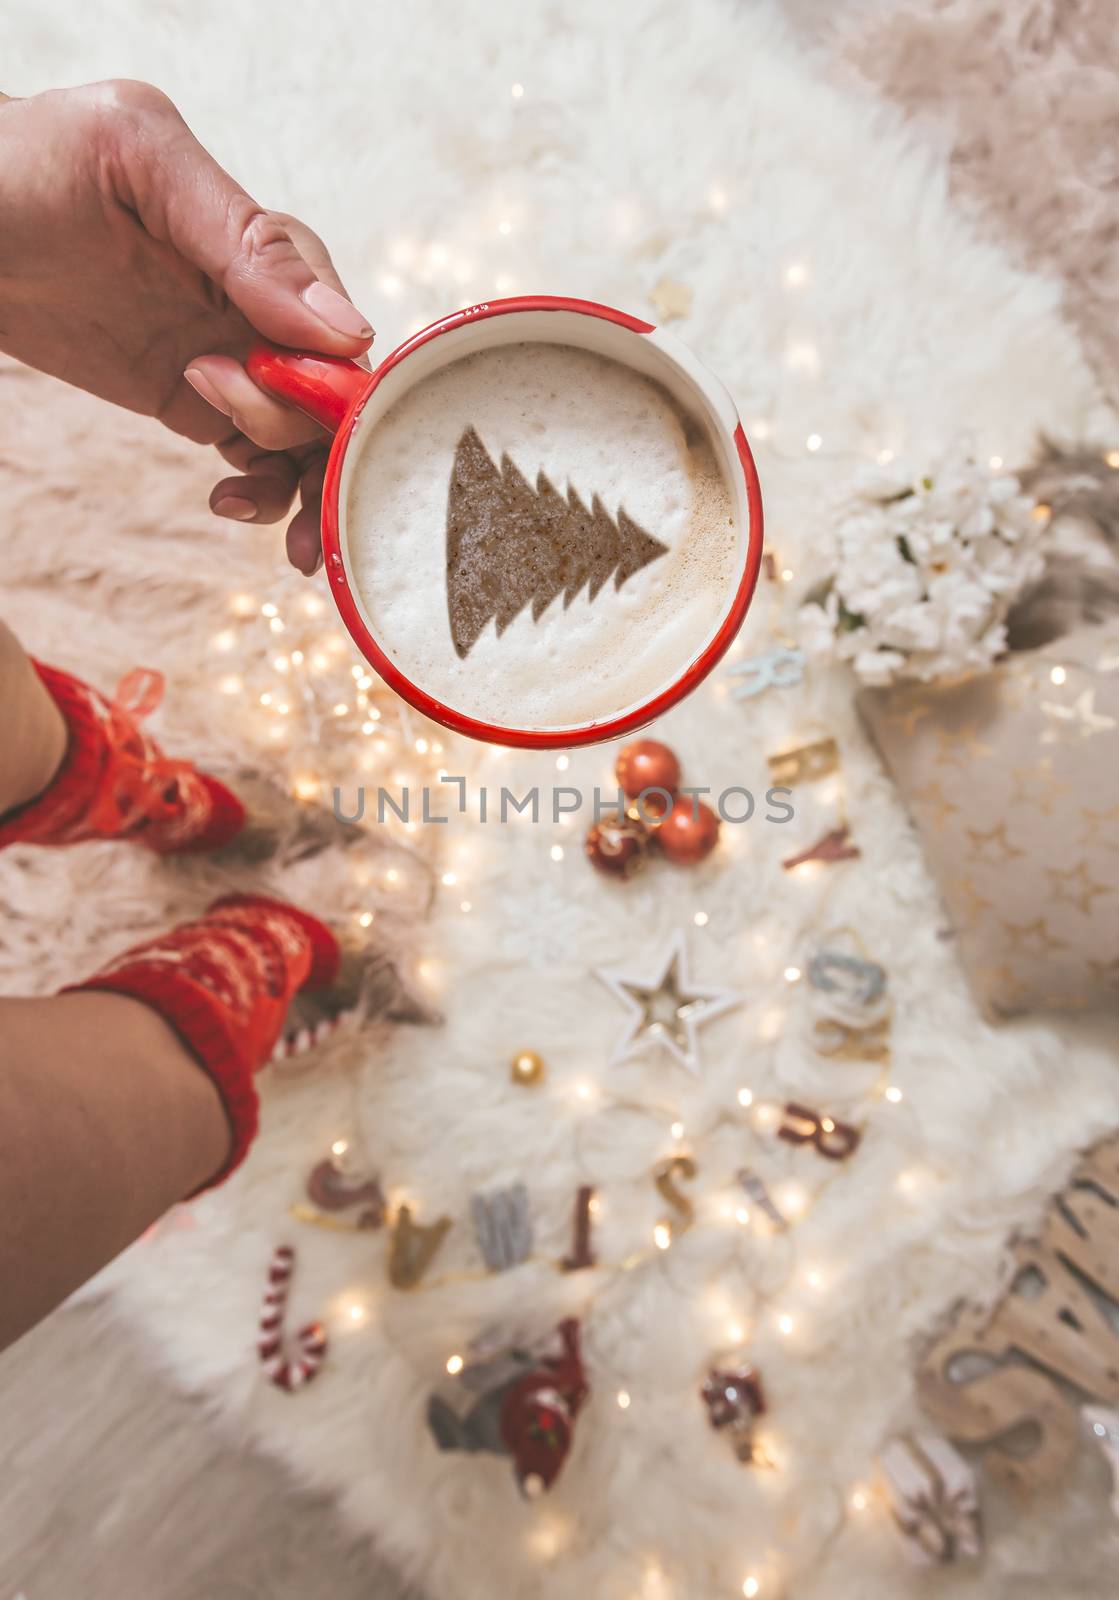 Festive Cappuccino with Christmas tree and decorations by lovleah